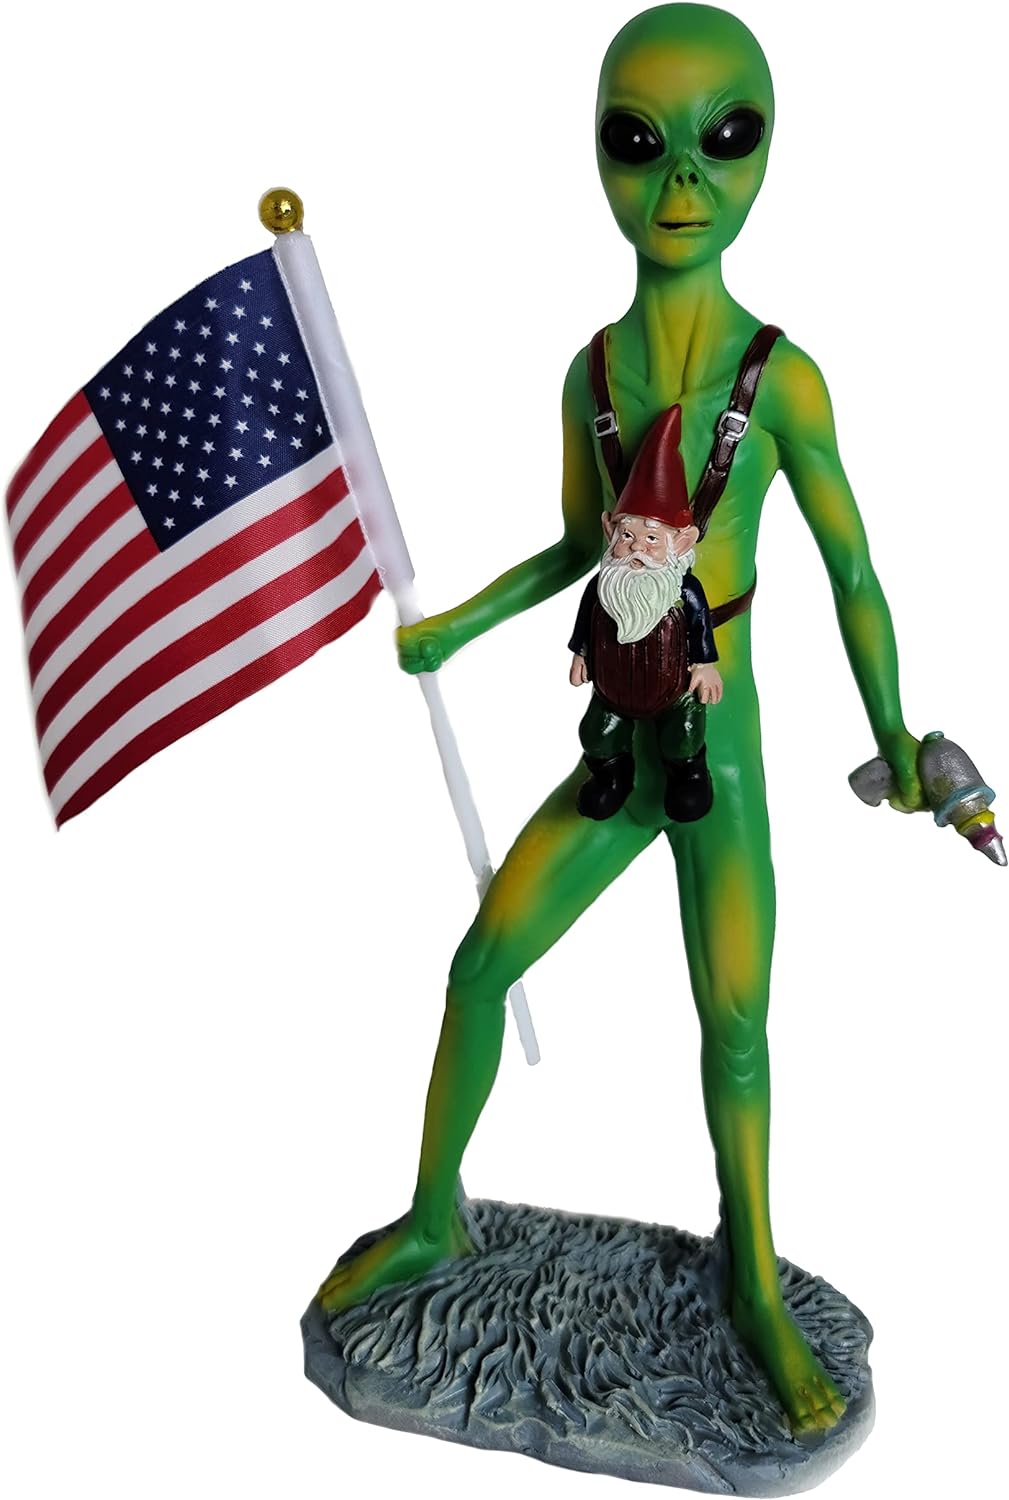 Alien And A Gnome Statue - Indoor or Outdoor Garden Gnome Sculpture for Patio, Yard or Lawn